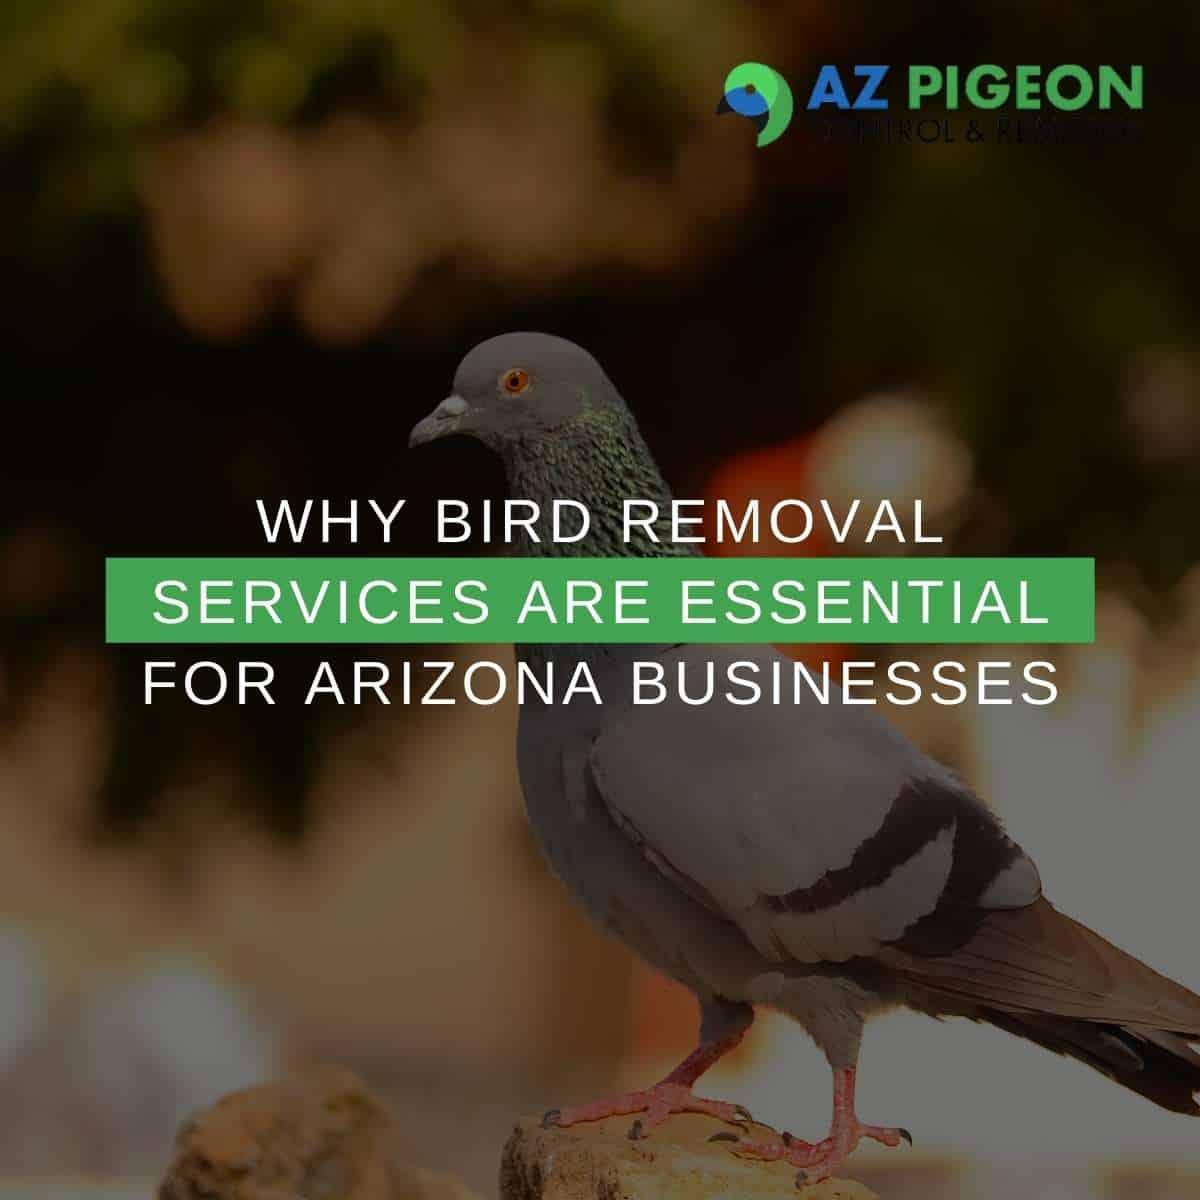 Why Bird Removal Services Are Essential For Arizona Businesses